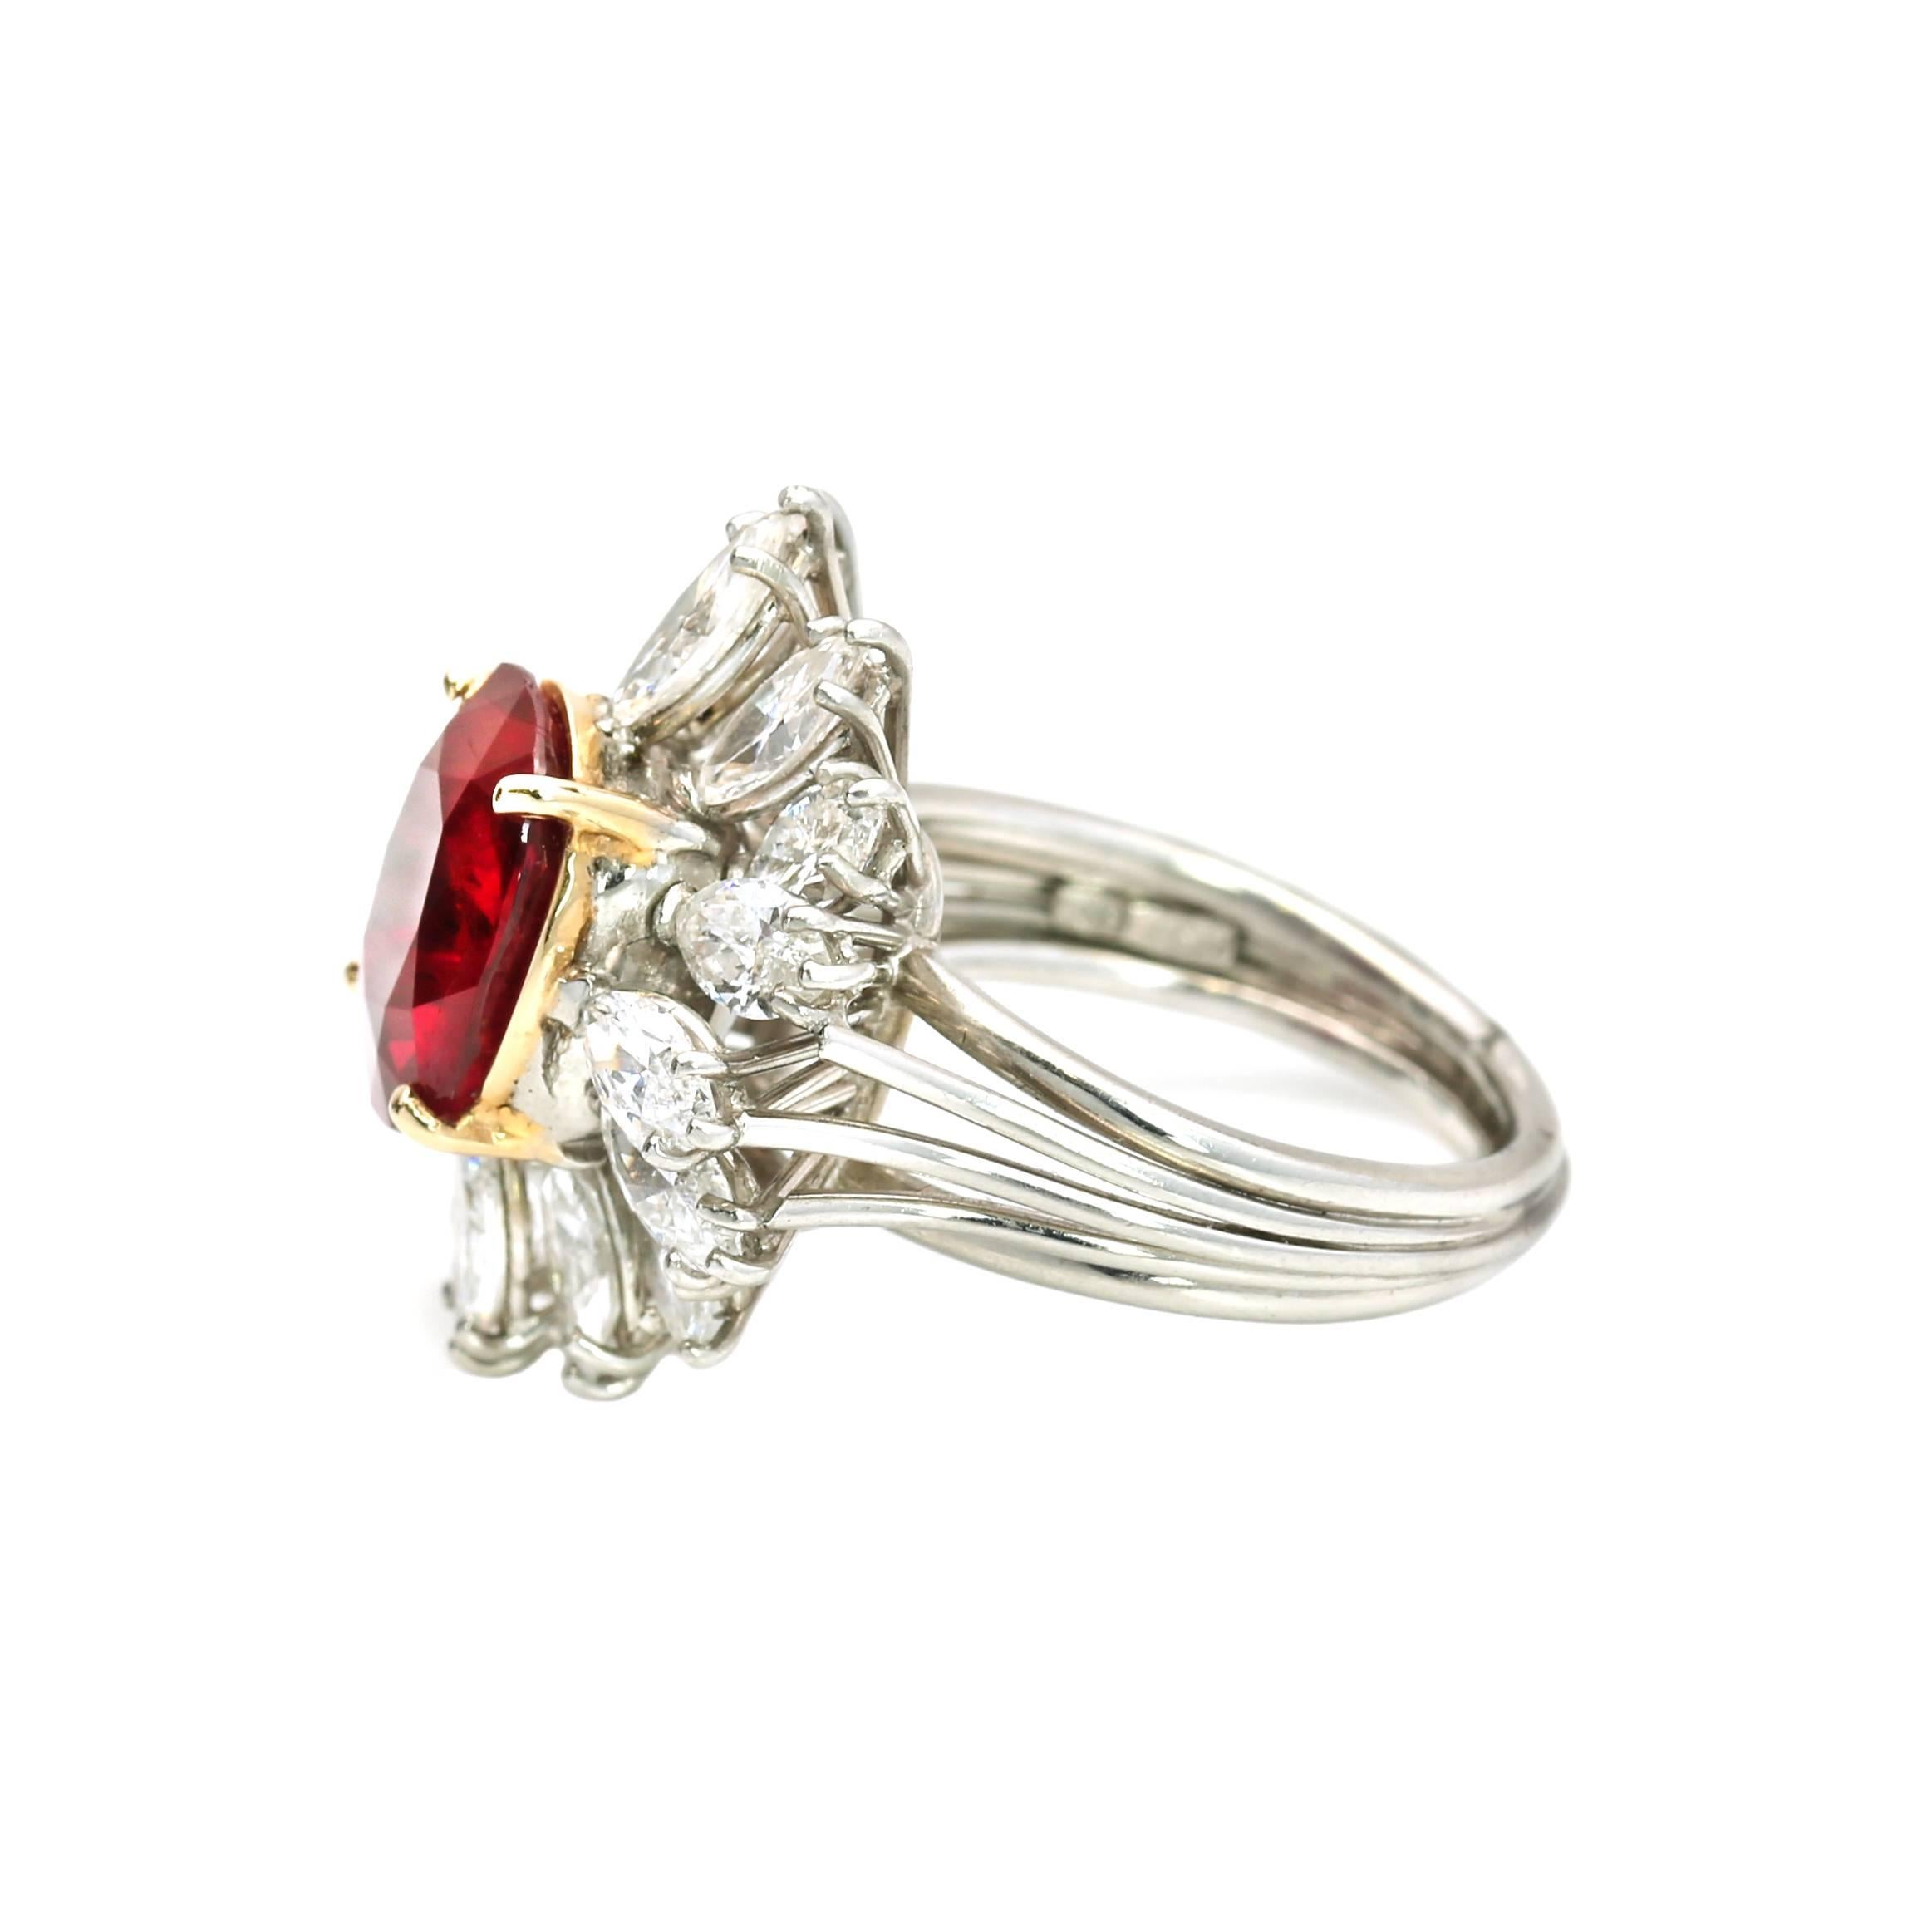 This Magnificent AGL Certified 5.15 Ct Cushion Cut Natural Ruby is set with 16 Diamonds Weighing 4.25 Cts, This Ring is set in Platinum.
AGL Certificate CS 60959
Metal Weight 12.40 grams